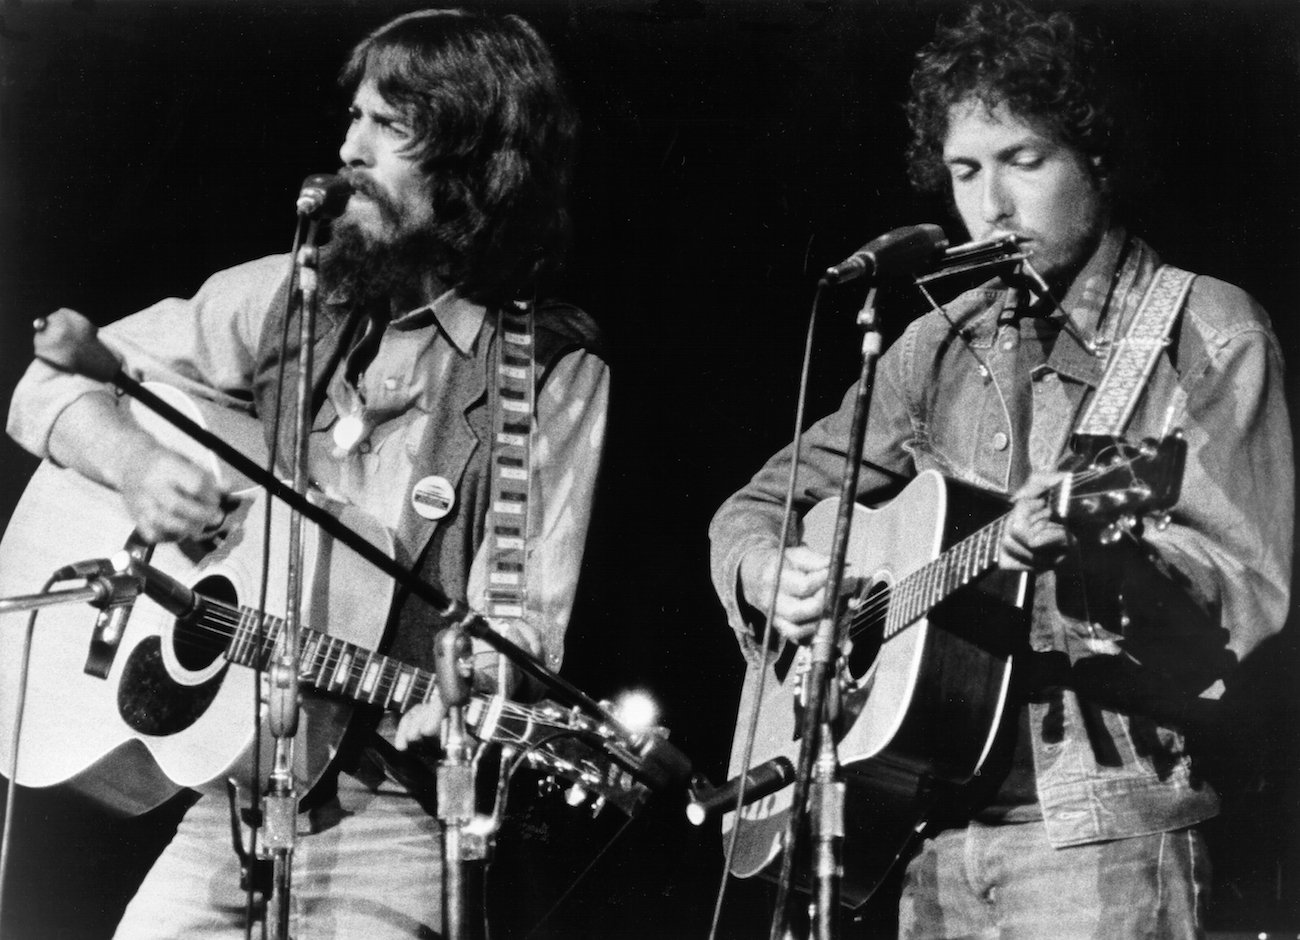 George Harrison and Bob Dylan performing at the Concert for Bangladesh.